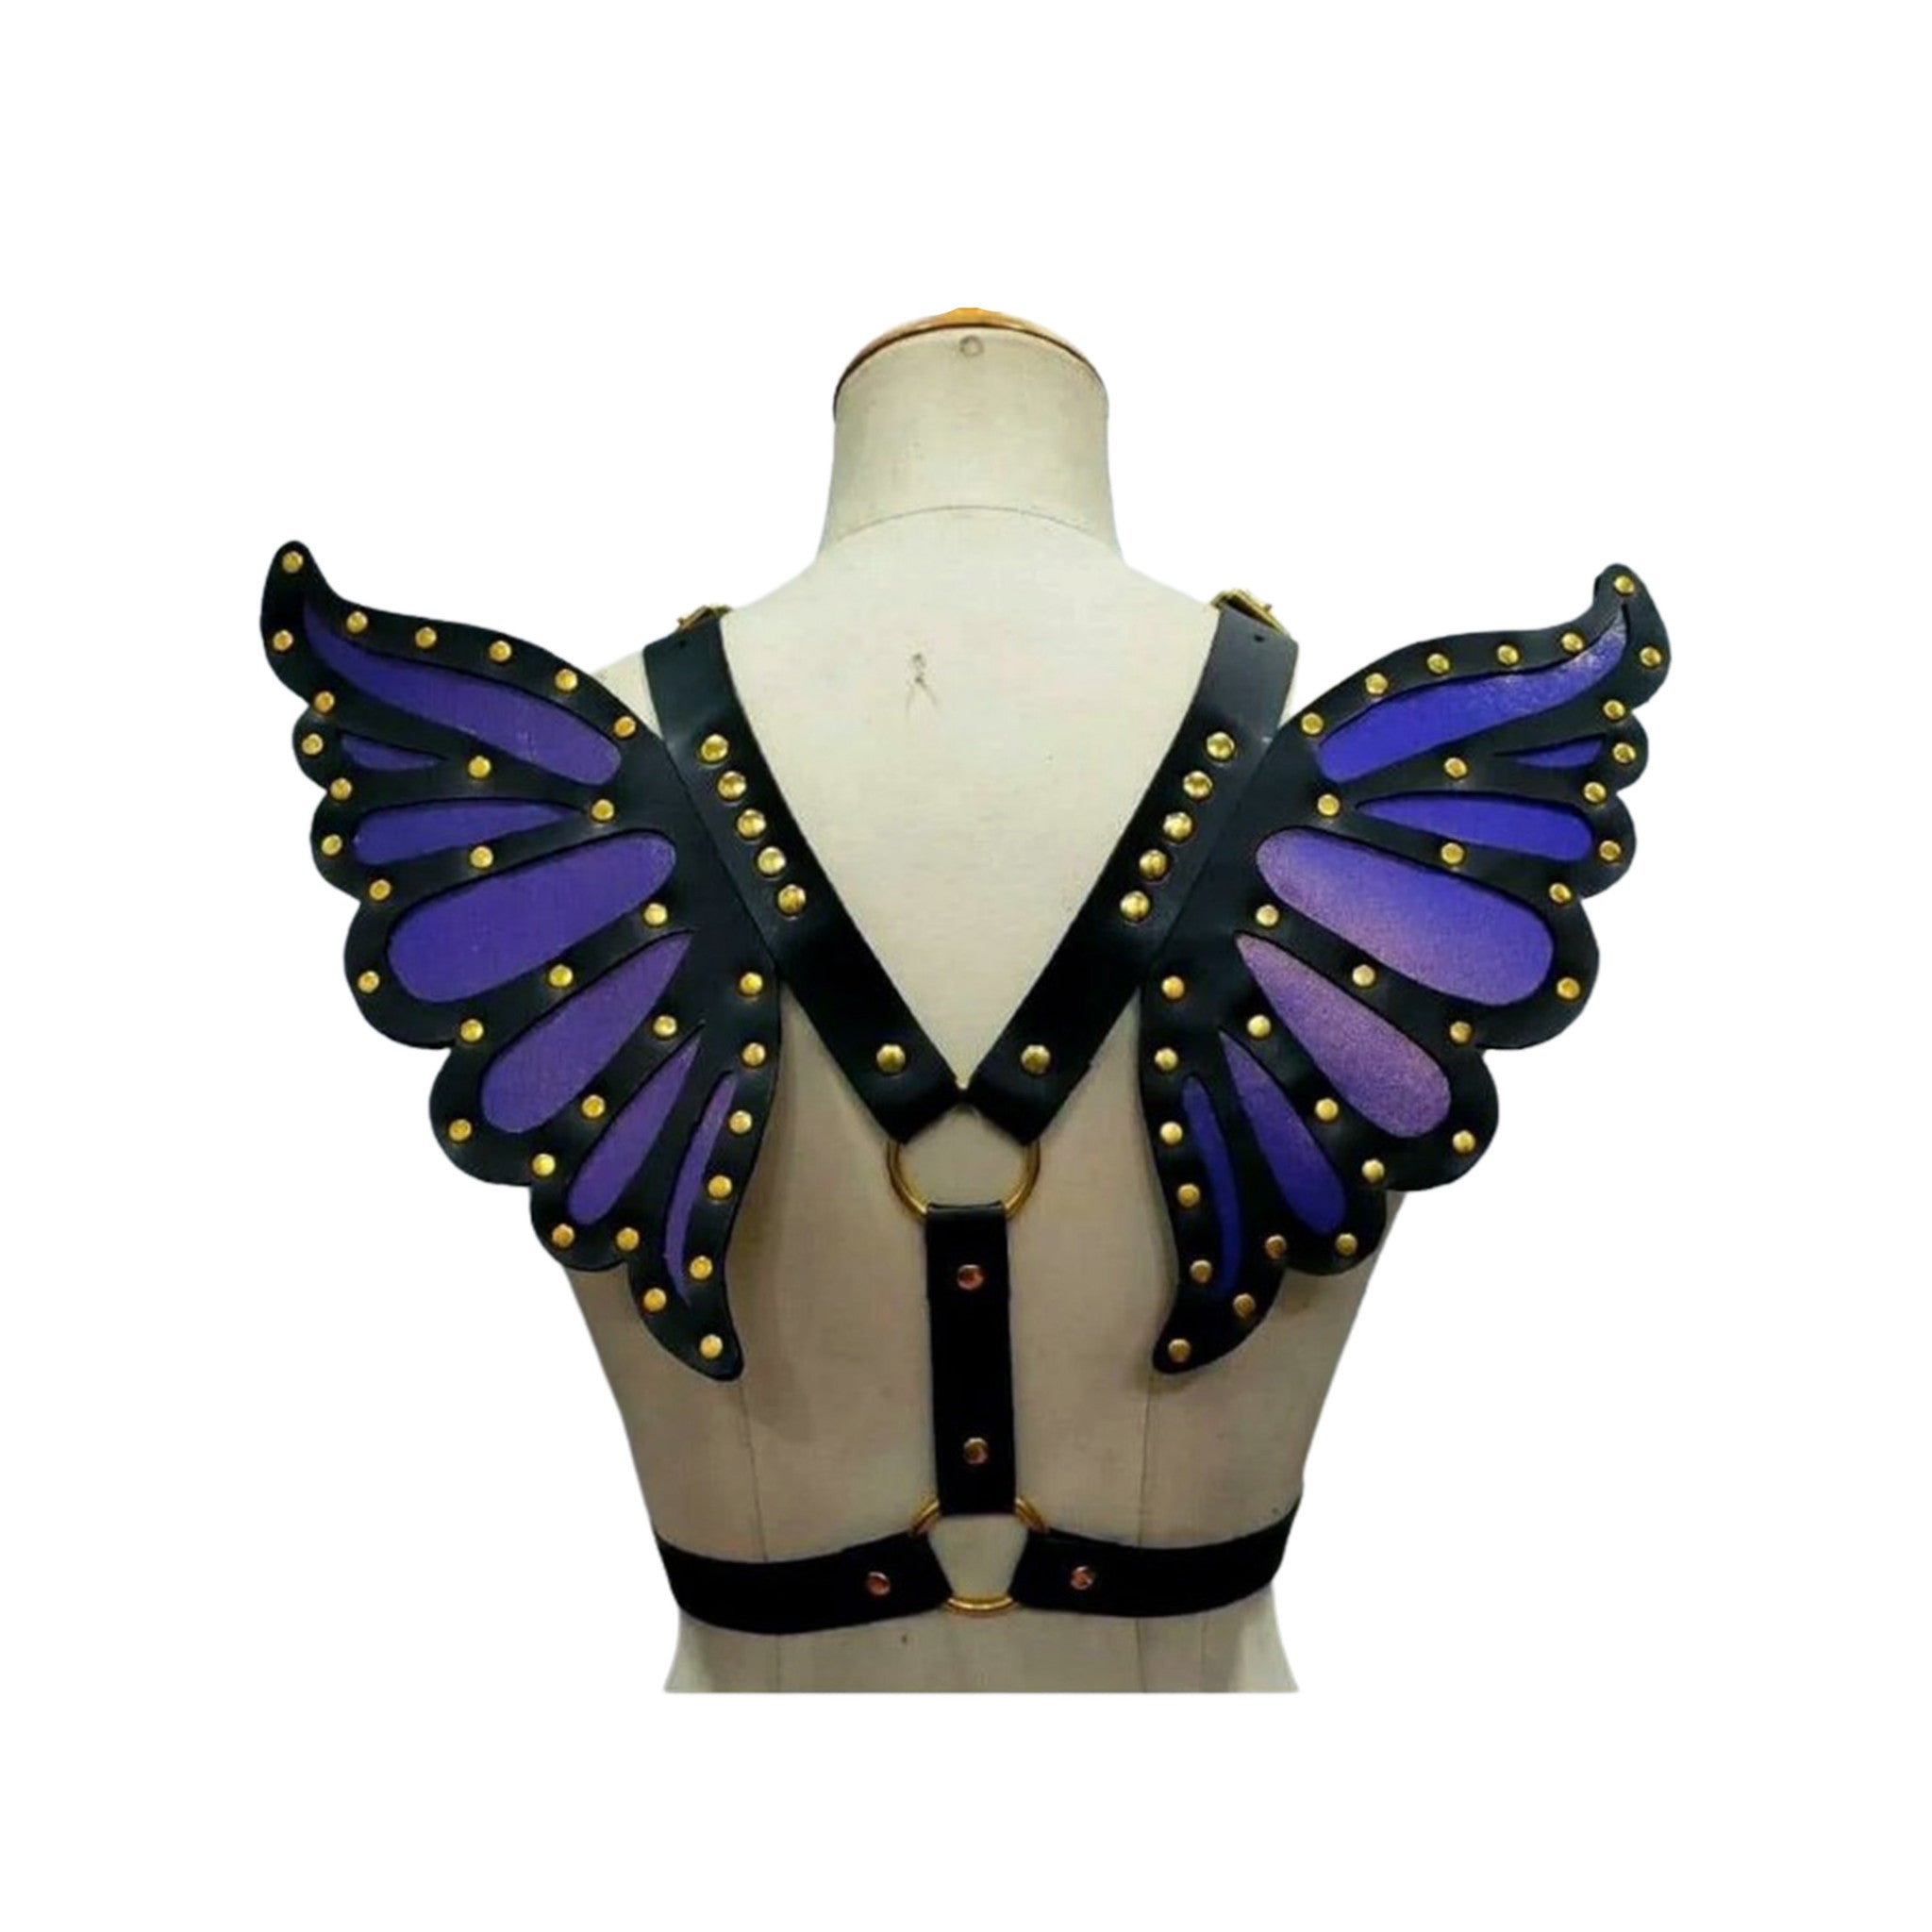 Faux Leather Butterfly Wing Harness W Gold Hardware